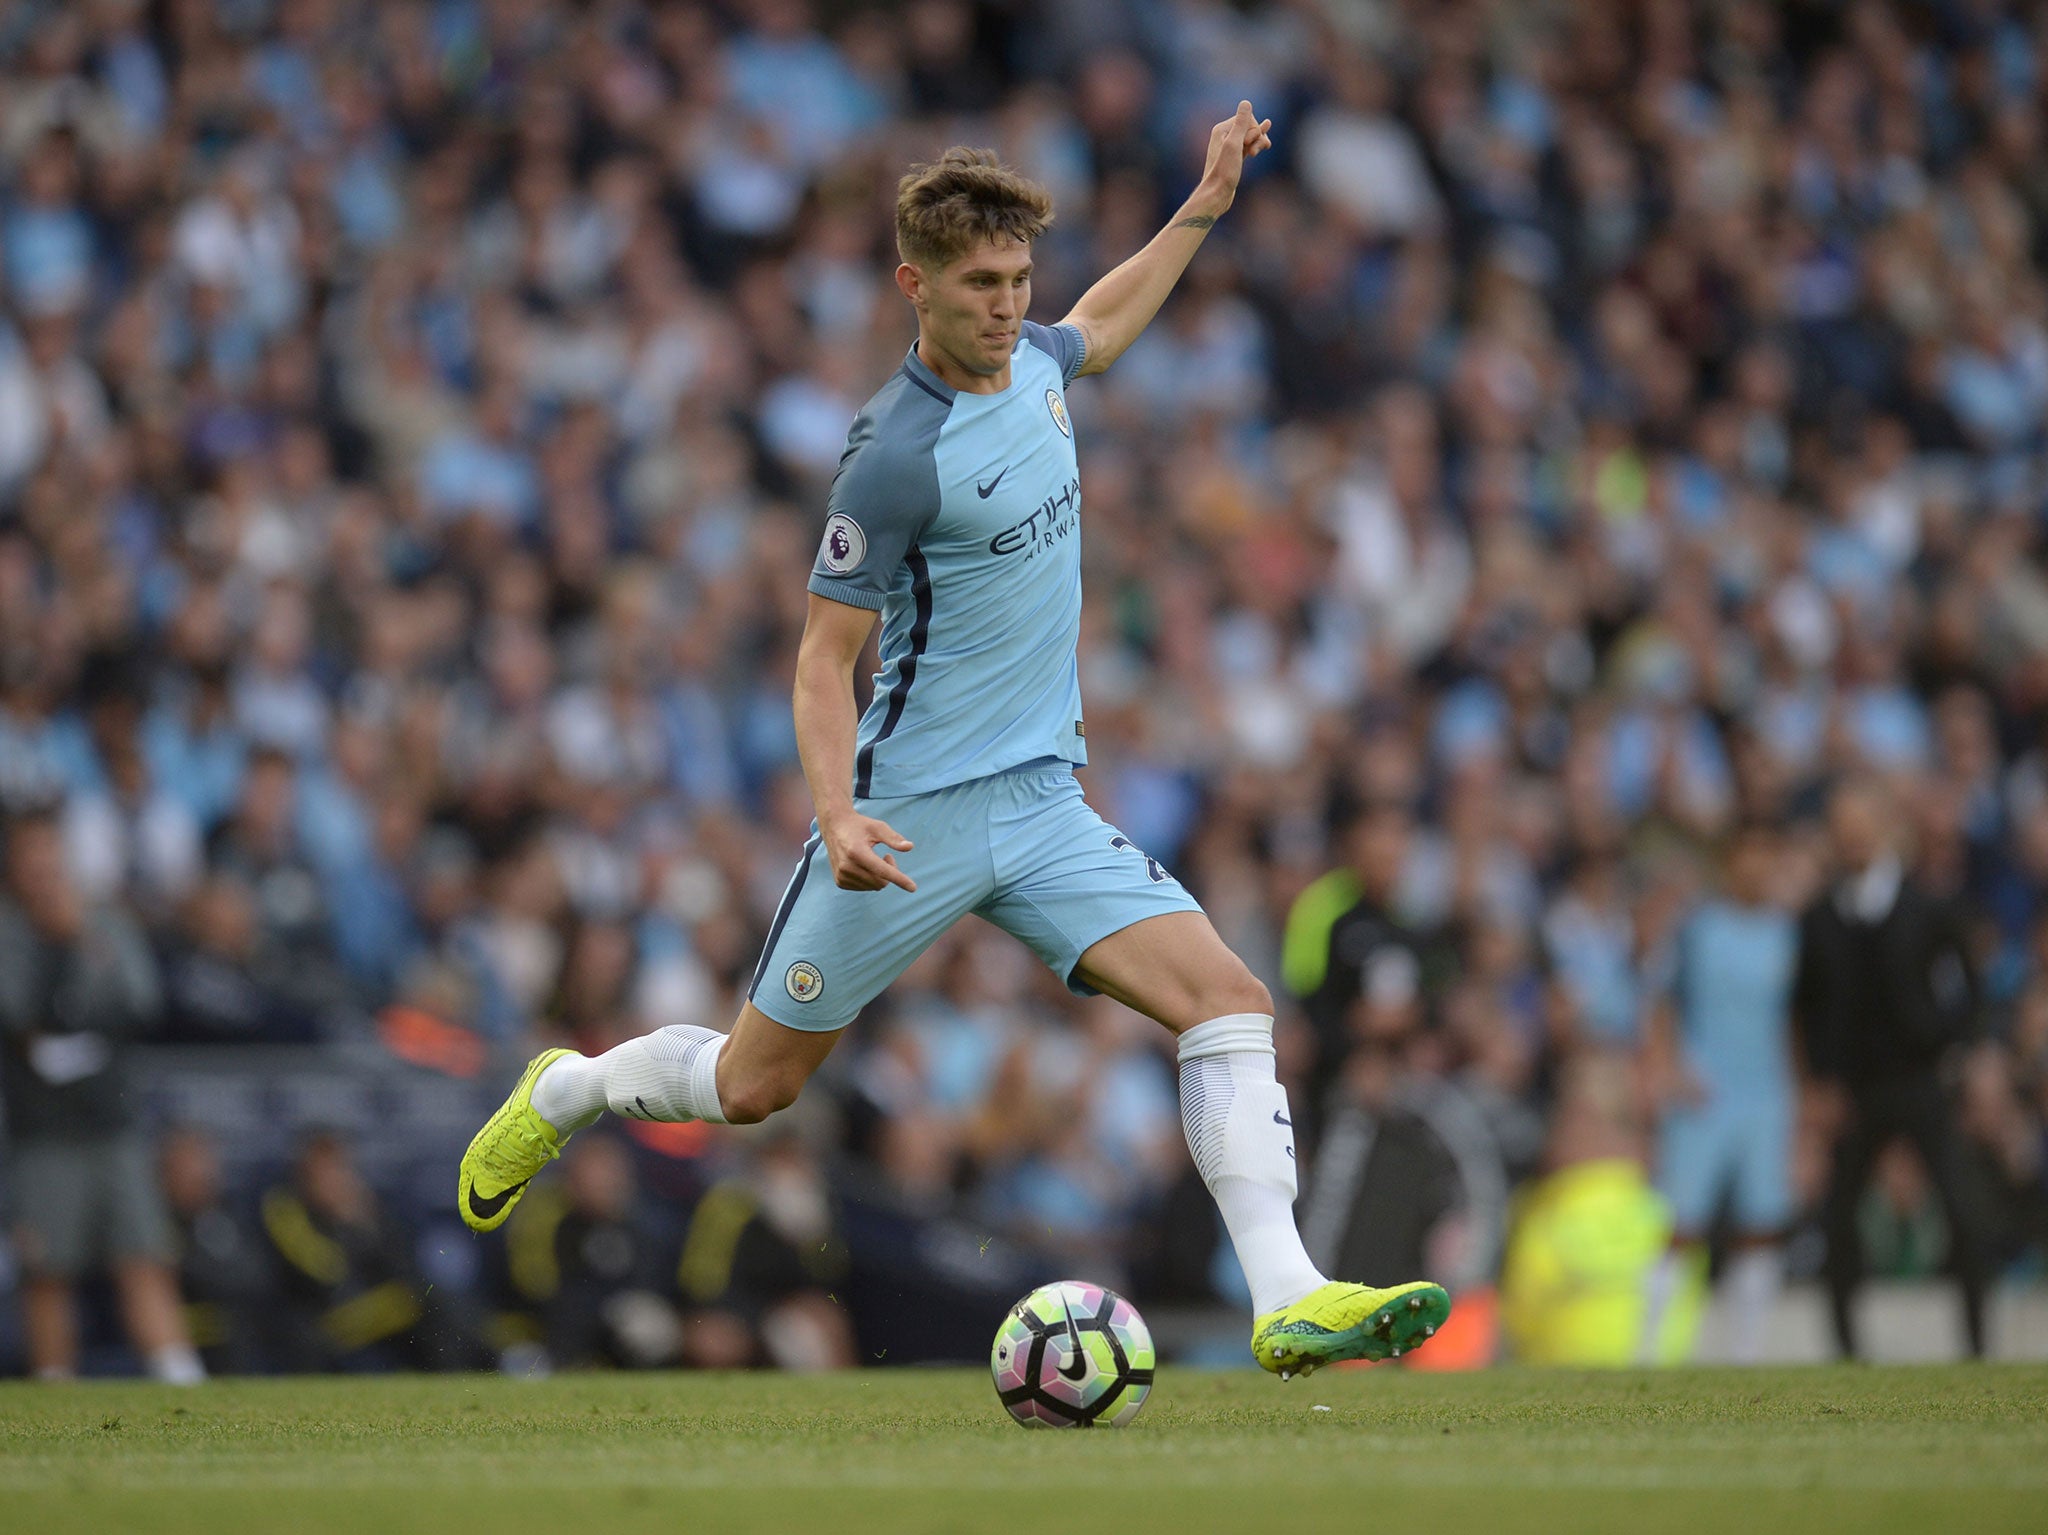 John Stones is comfortable on the ball - to the delight of Pep Guardiola